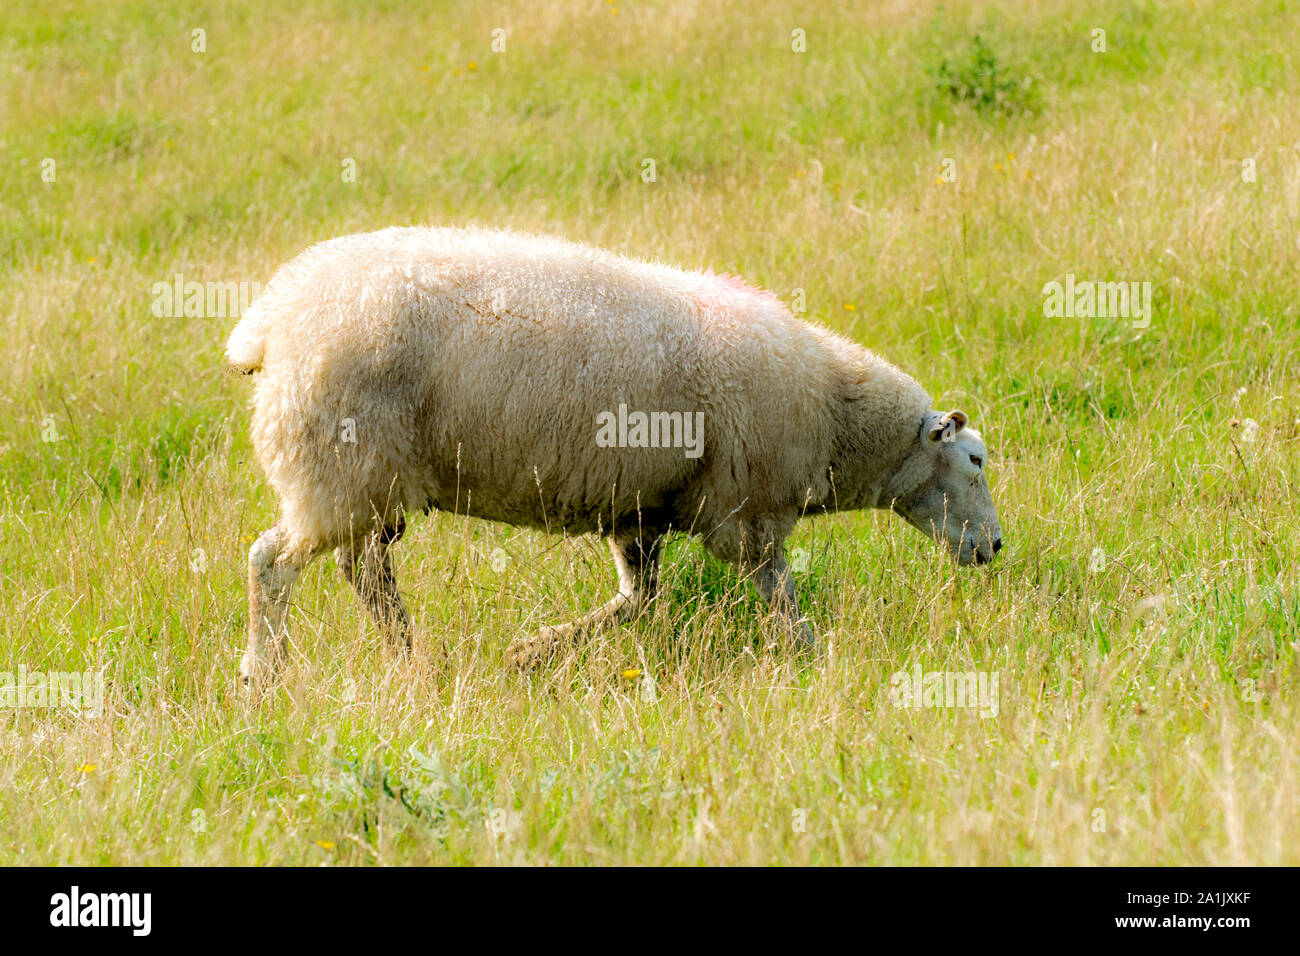 Mammal sheep on a dyke crown with green grass in front of blue sky Stock Photo